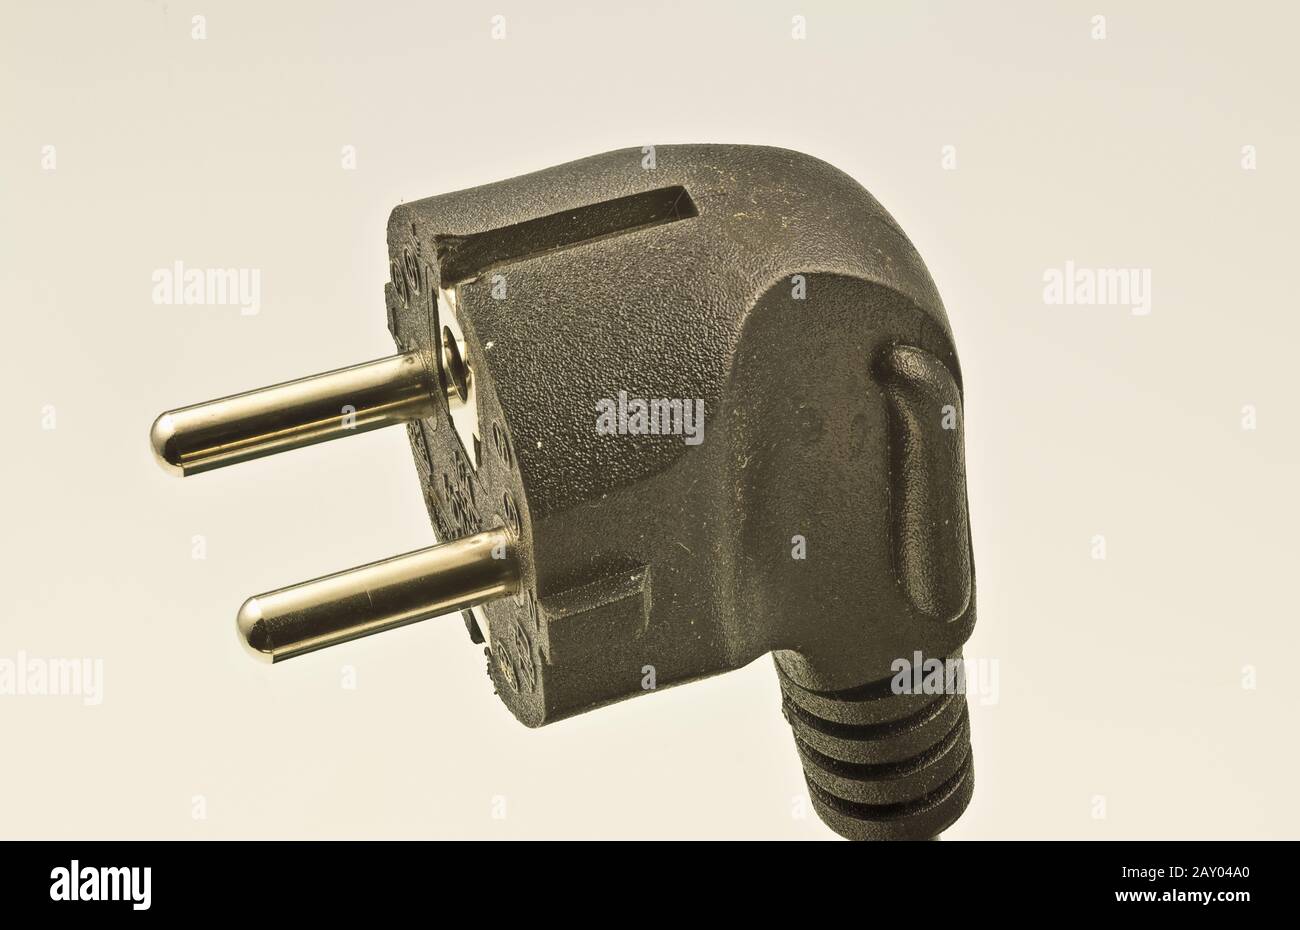 Power plug & outlet Type F (Schuko) - World Standards